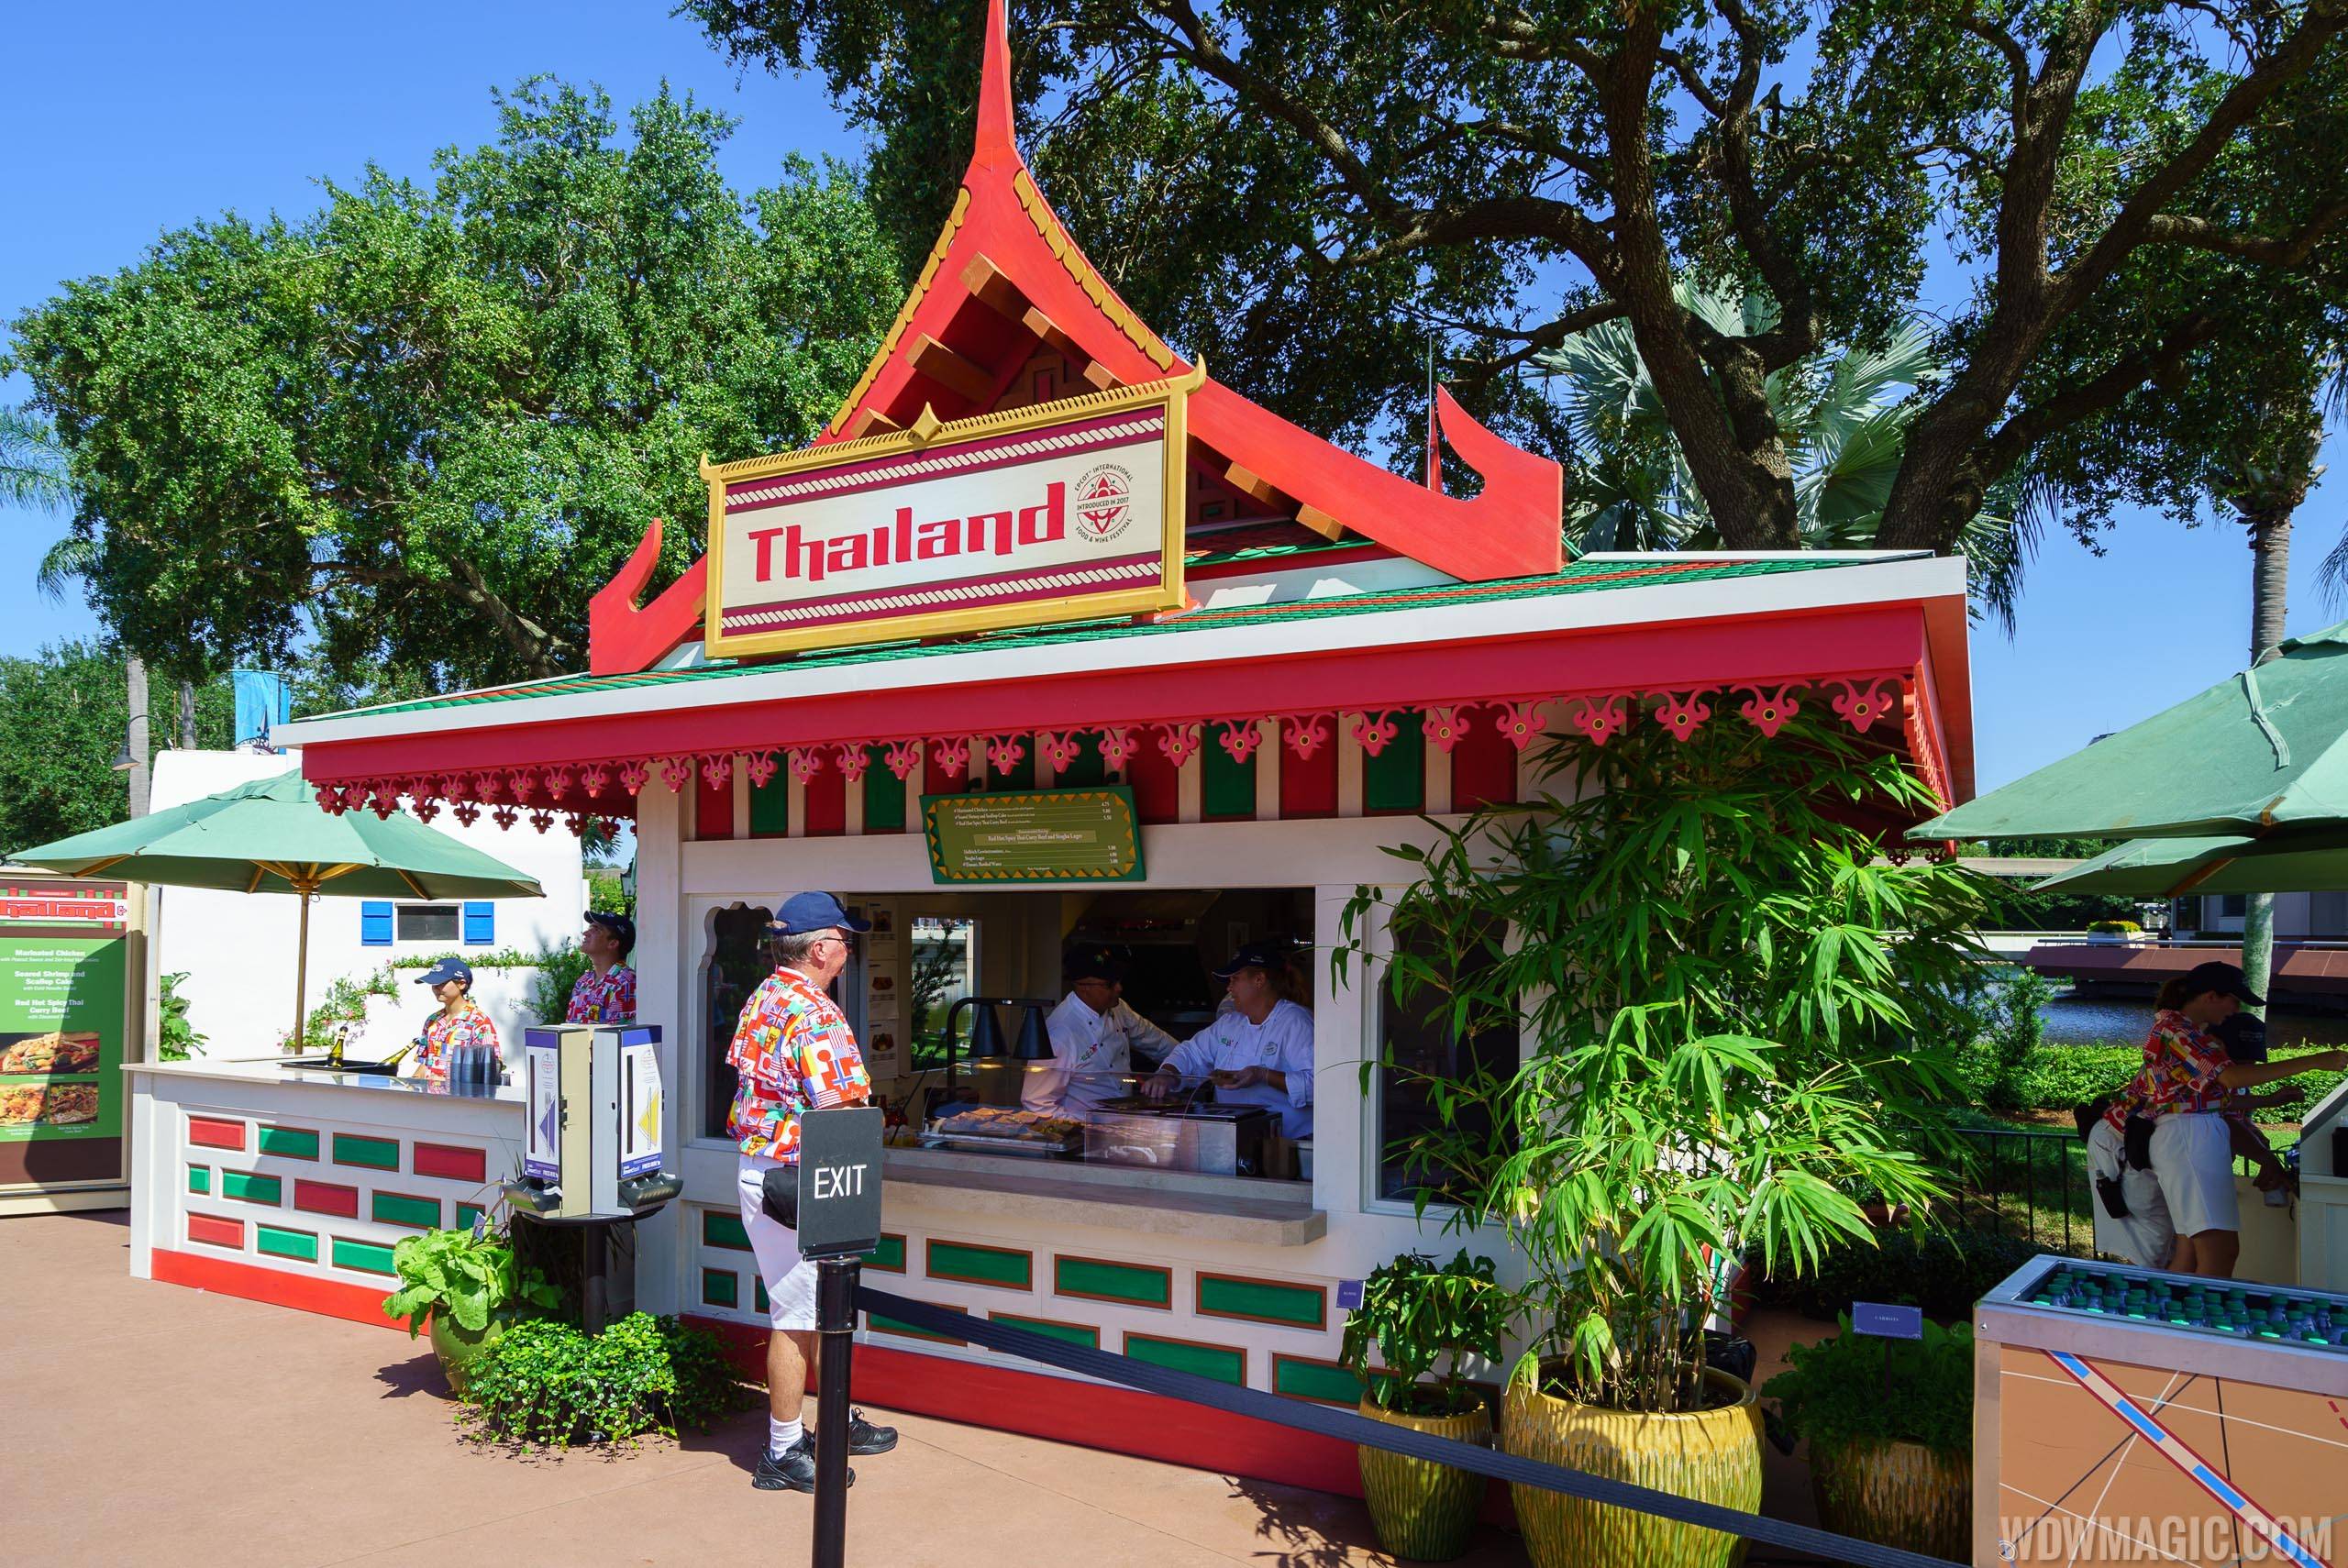 2017 Epcot Food and Wine Festival - Thailand marketplace kiosk